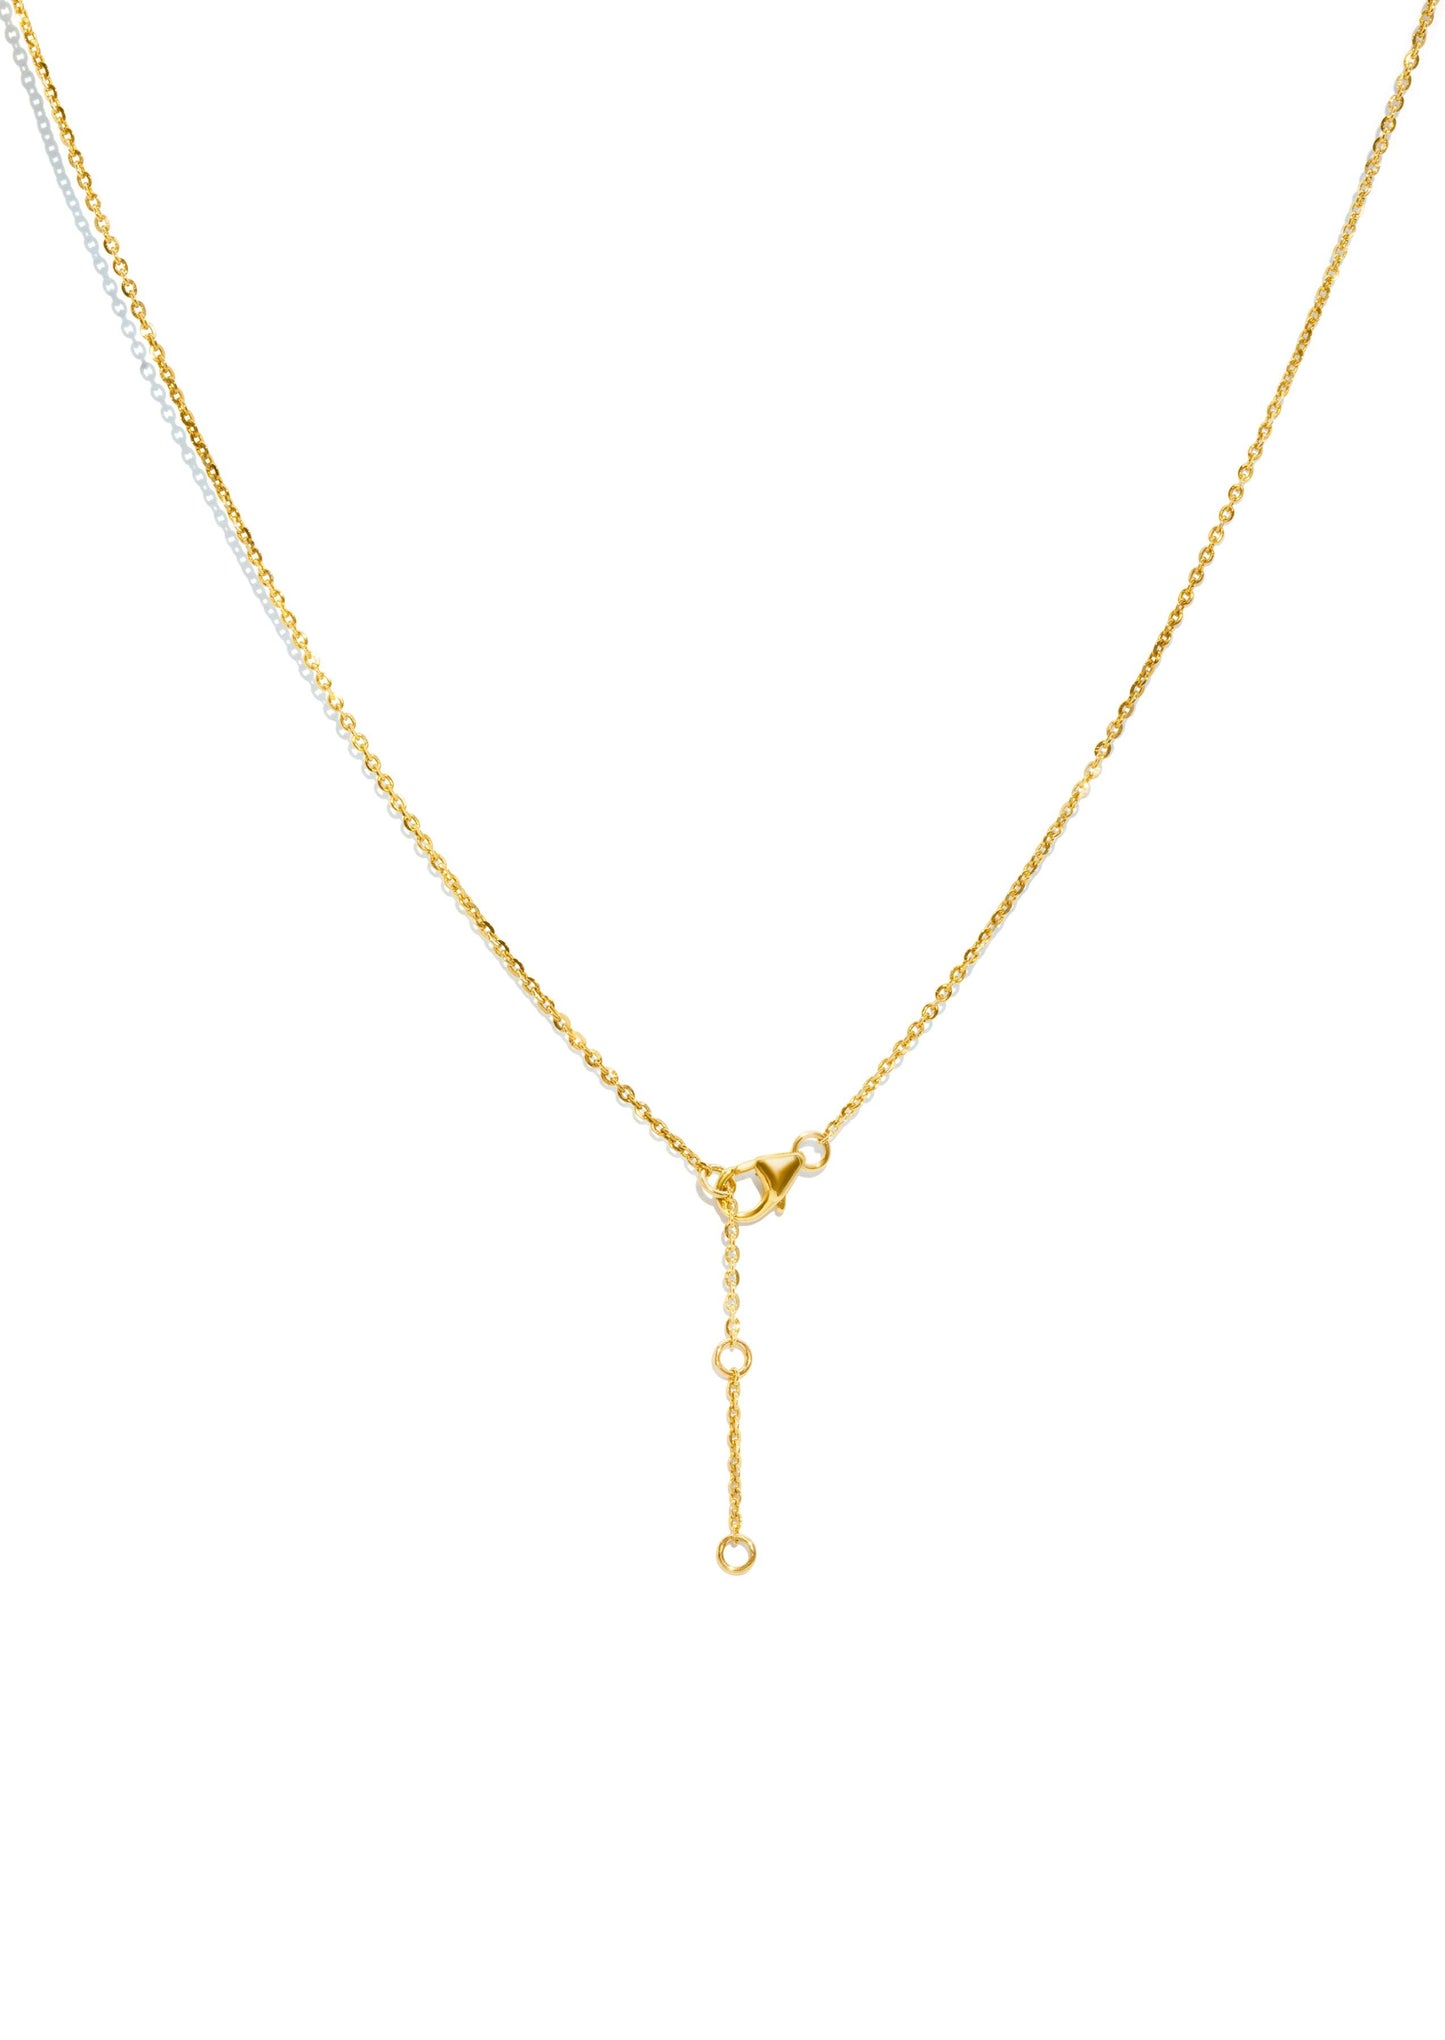 The Toi Et Moi Yellow Gold Cultured Diamond Necklace